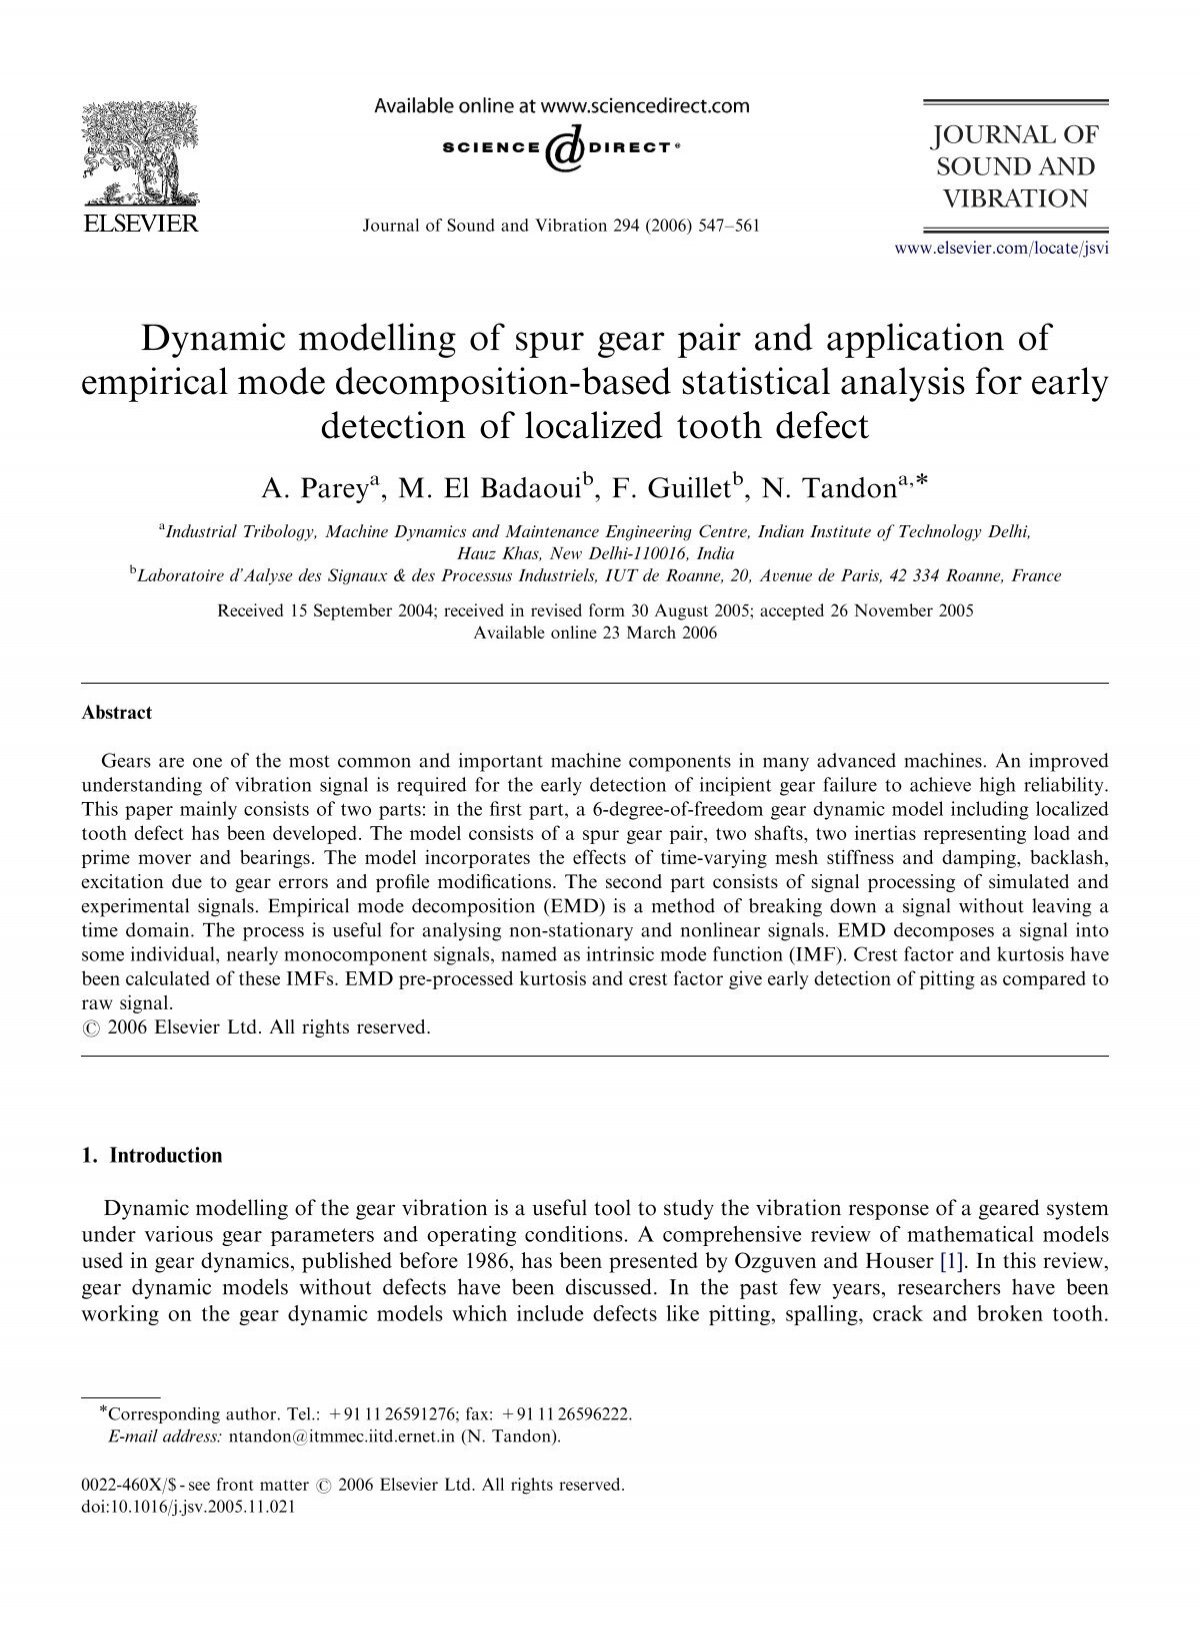 Dynamic Modelling Of Spur Gear Pair And Application Of Empirical